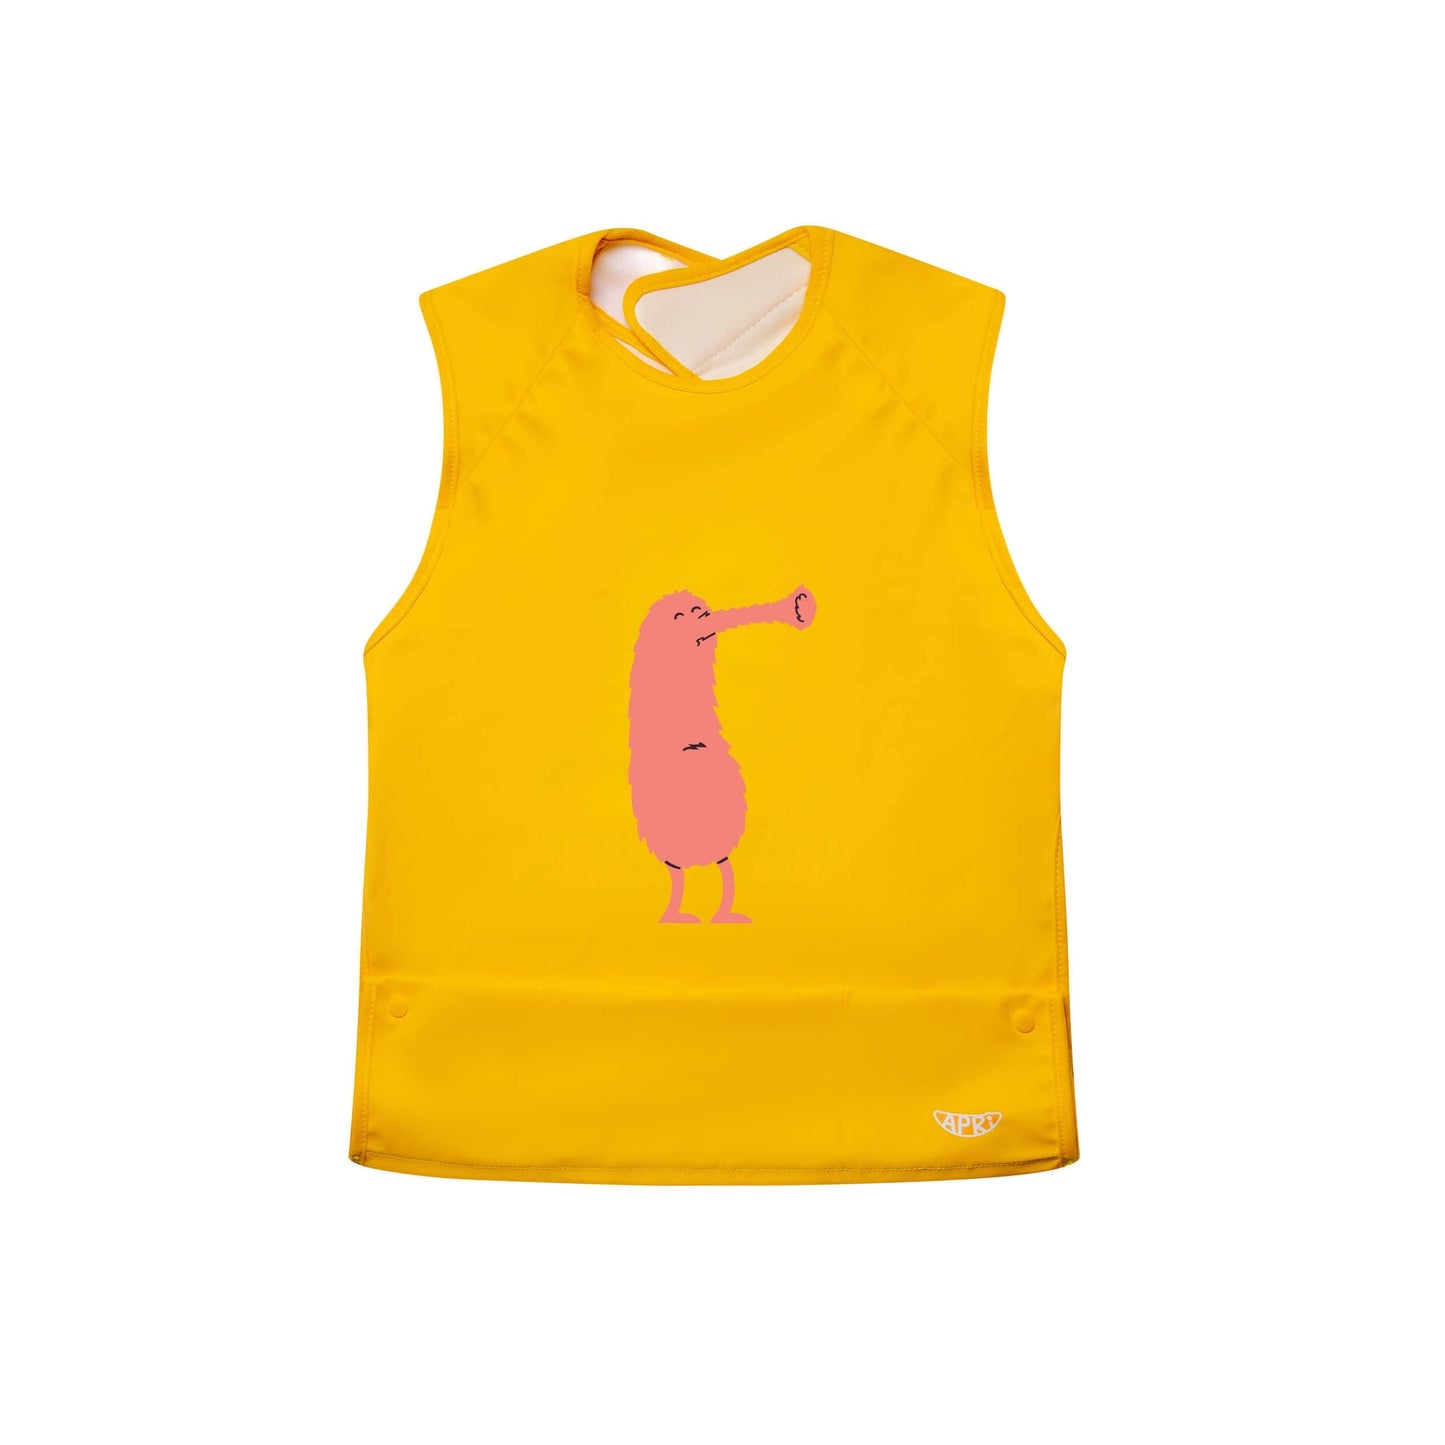 Washable special needs bib for kids, teens, and adults. Sunshine yellow with a playful pink monster cap-sleeve and food pocket!